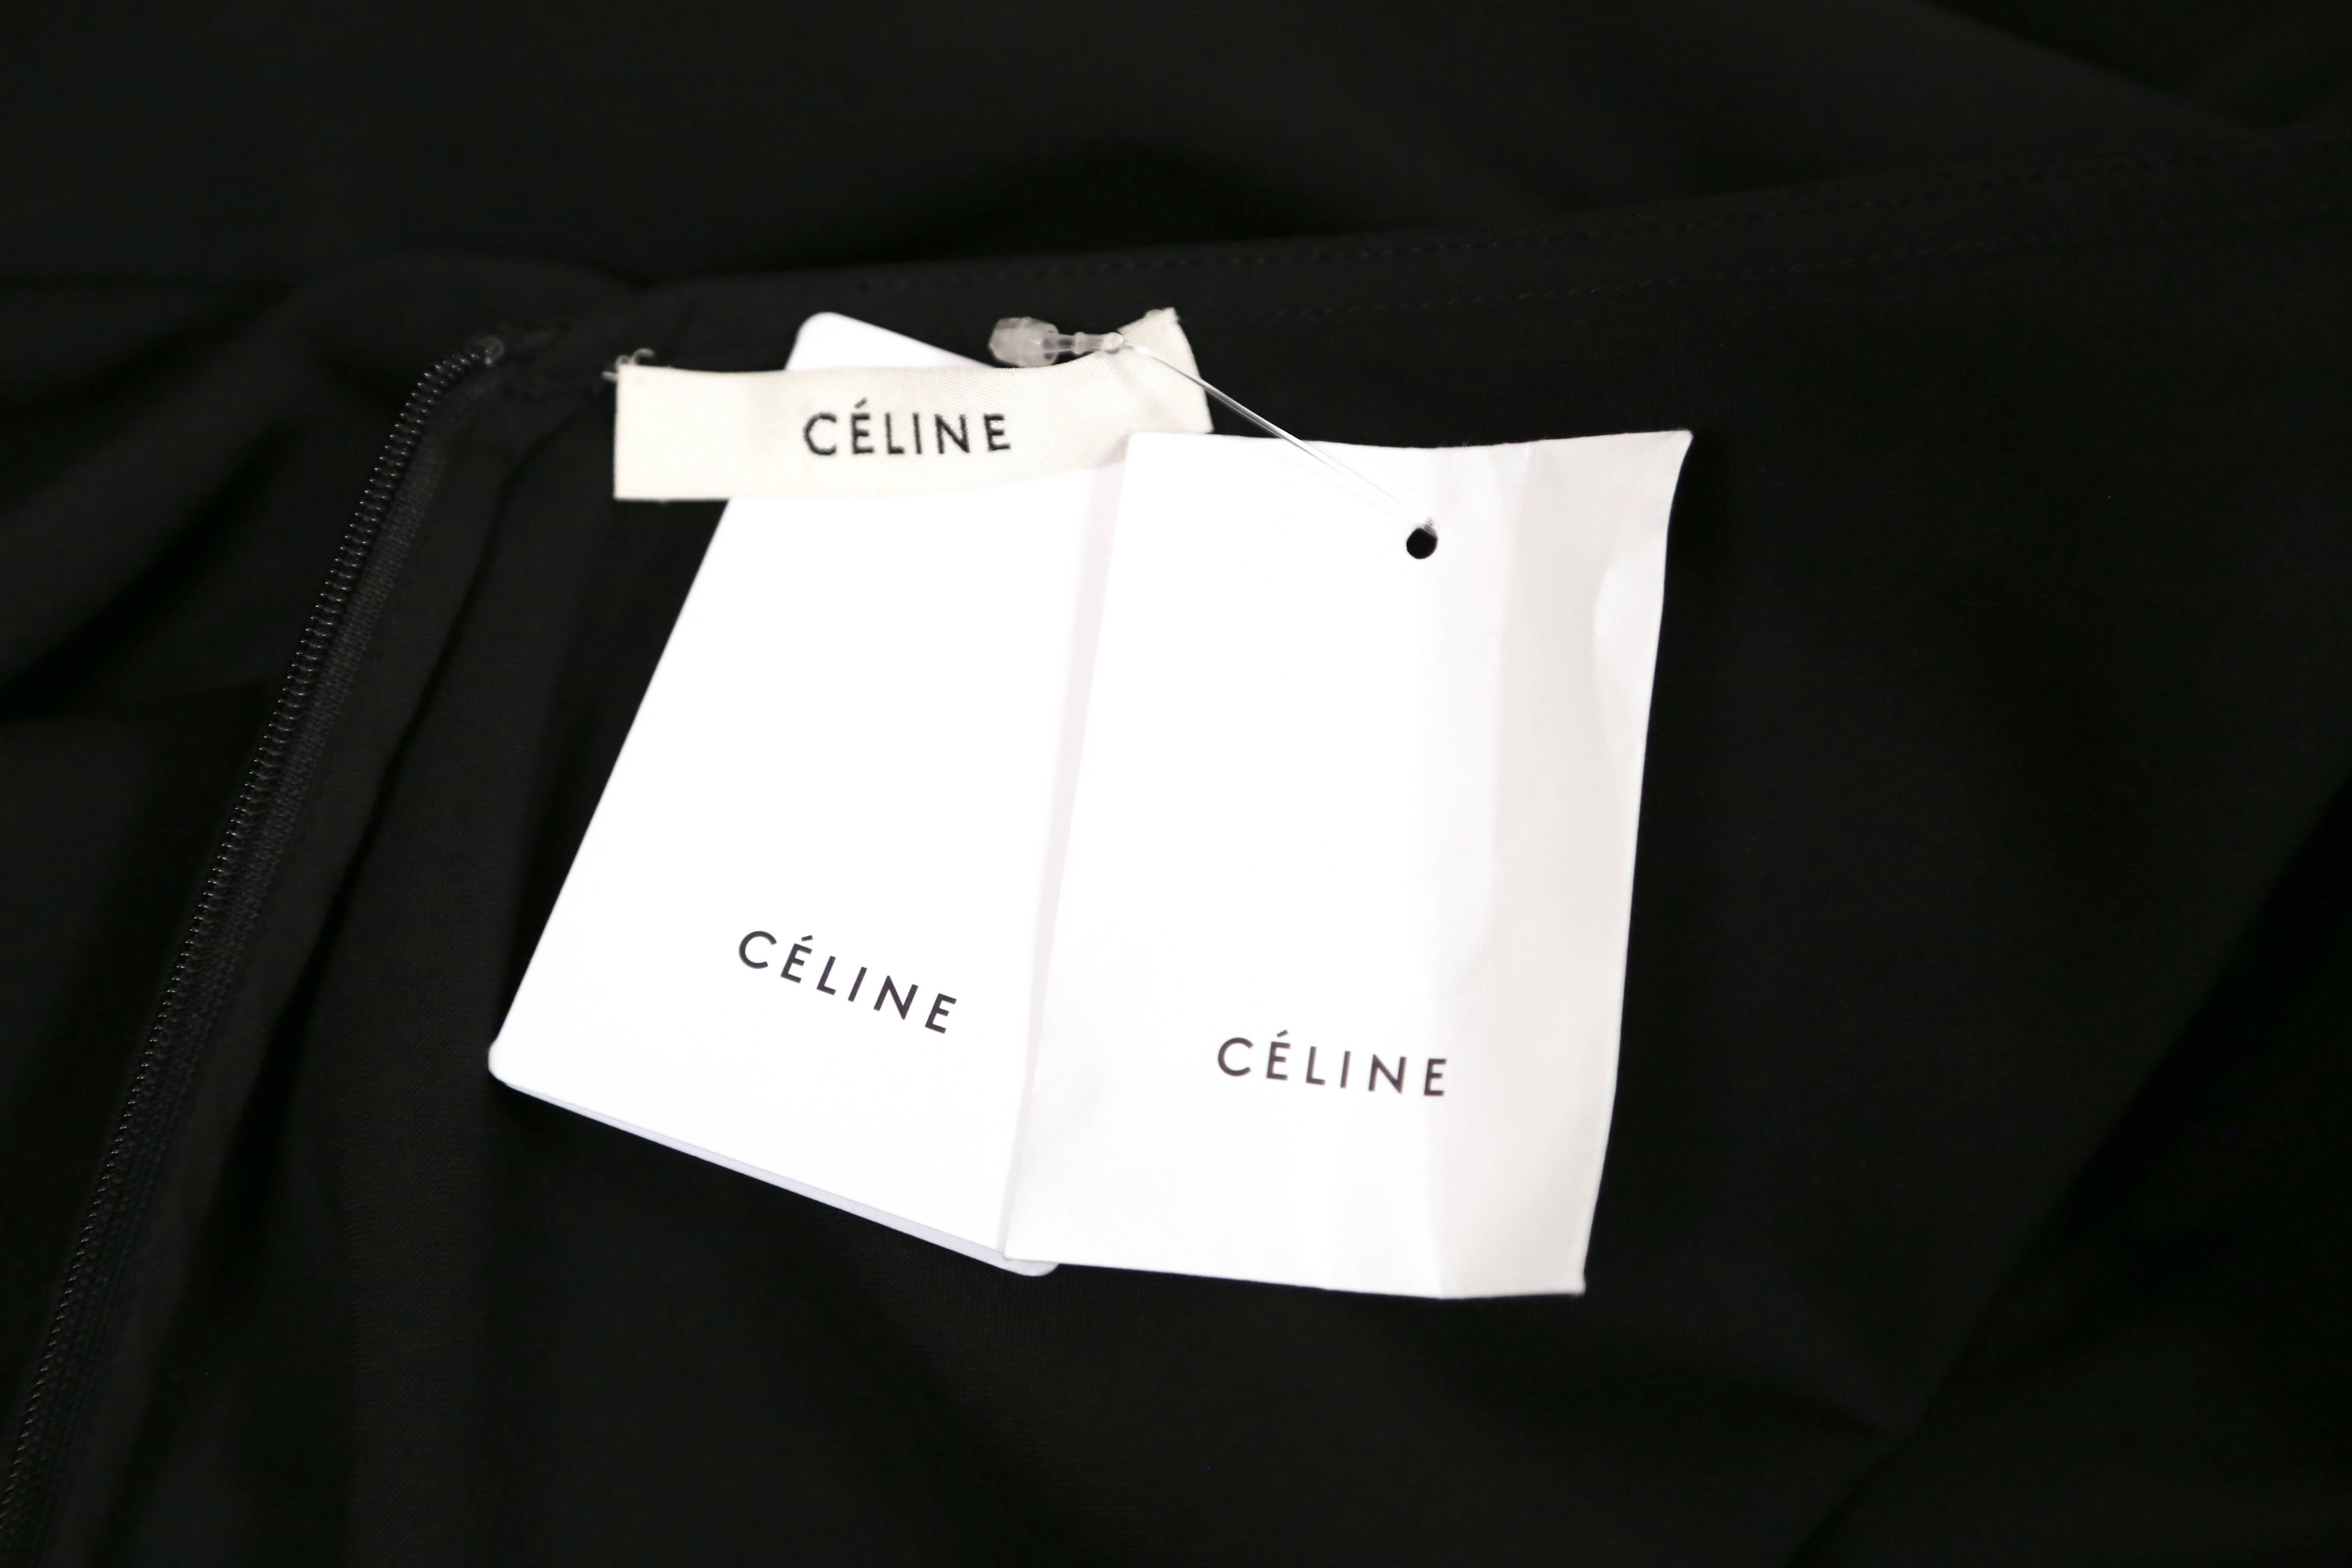 Celine by Phoebe Philo runway tunic dress with neck ties and open back 2